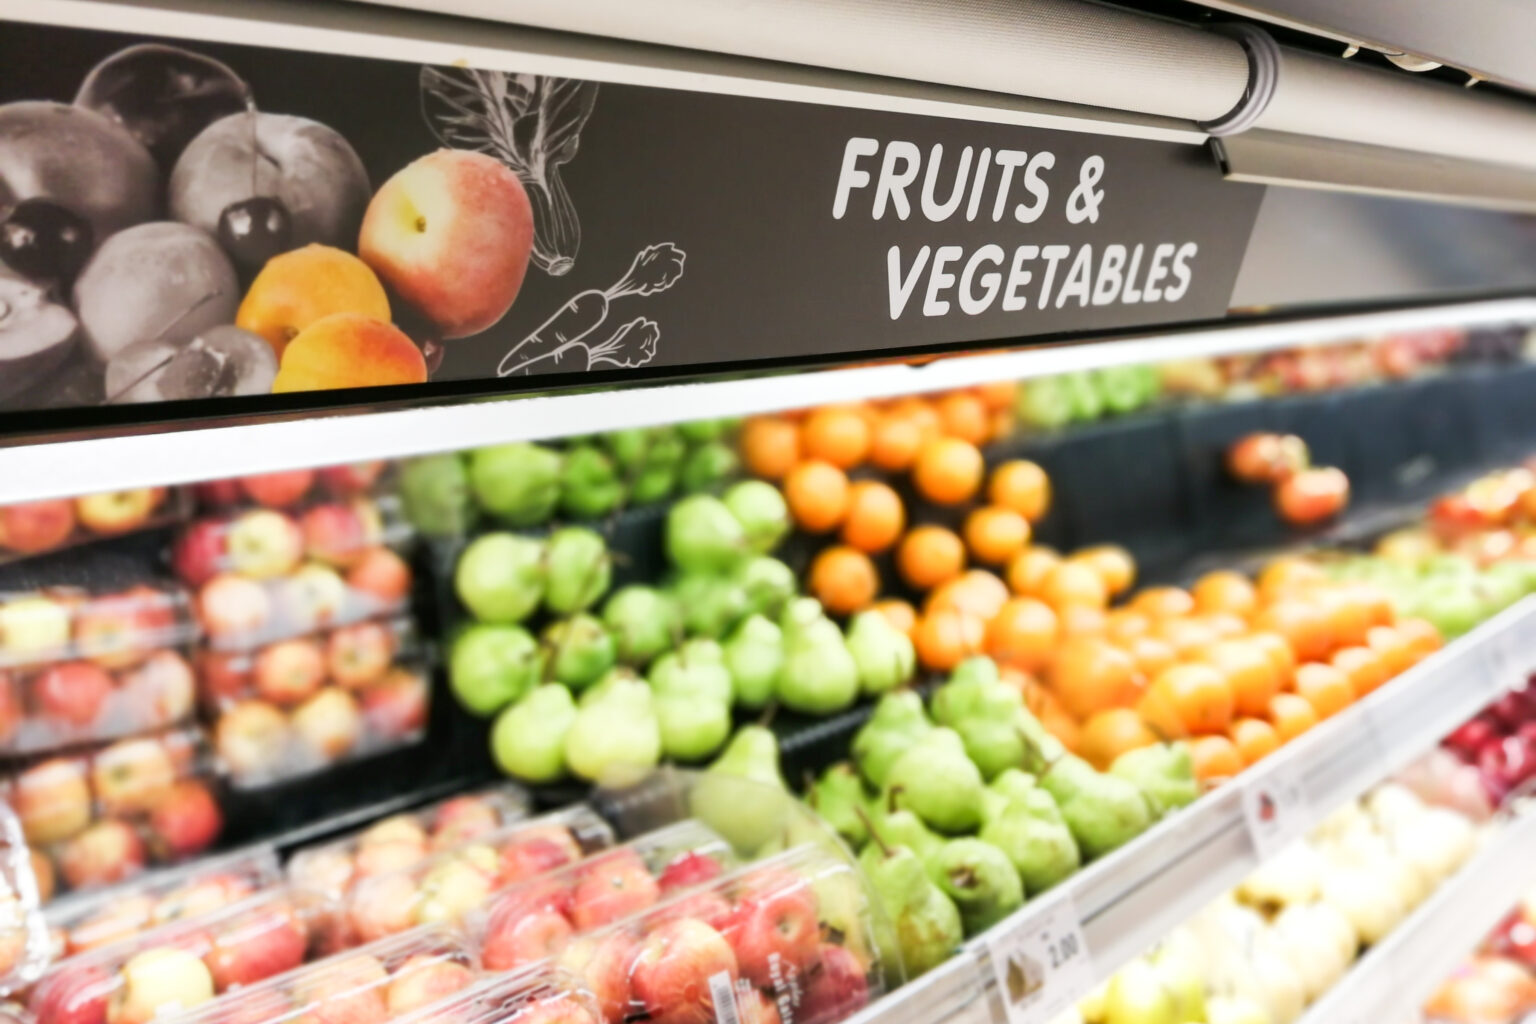 A sign that says “Fruits and Vegetables” hanging over the fruits and vegetables section at a grocery store.